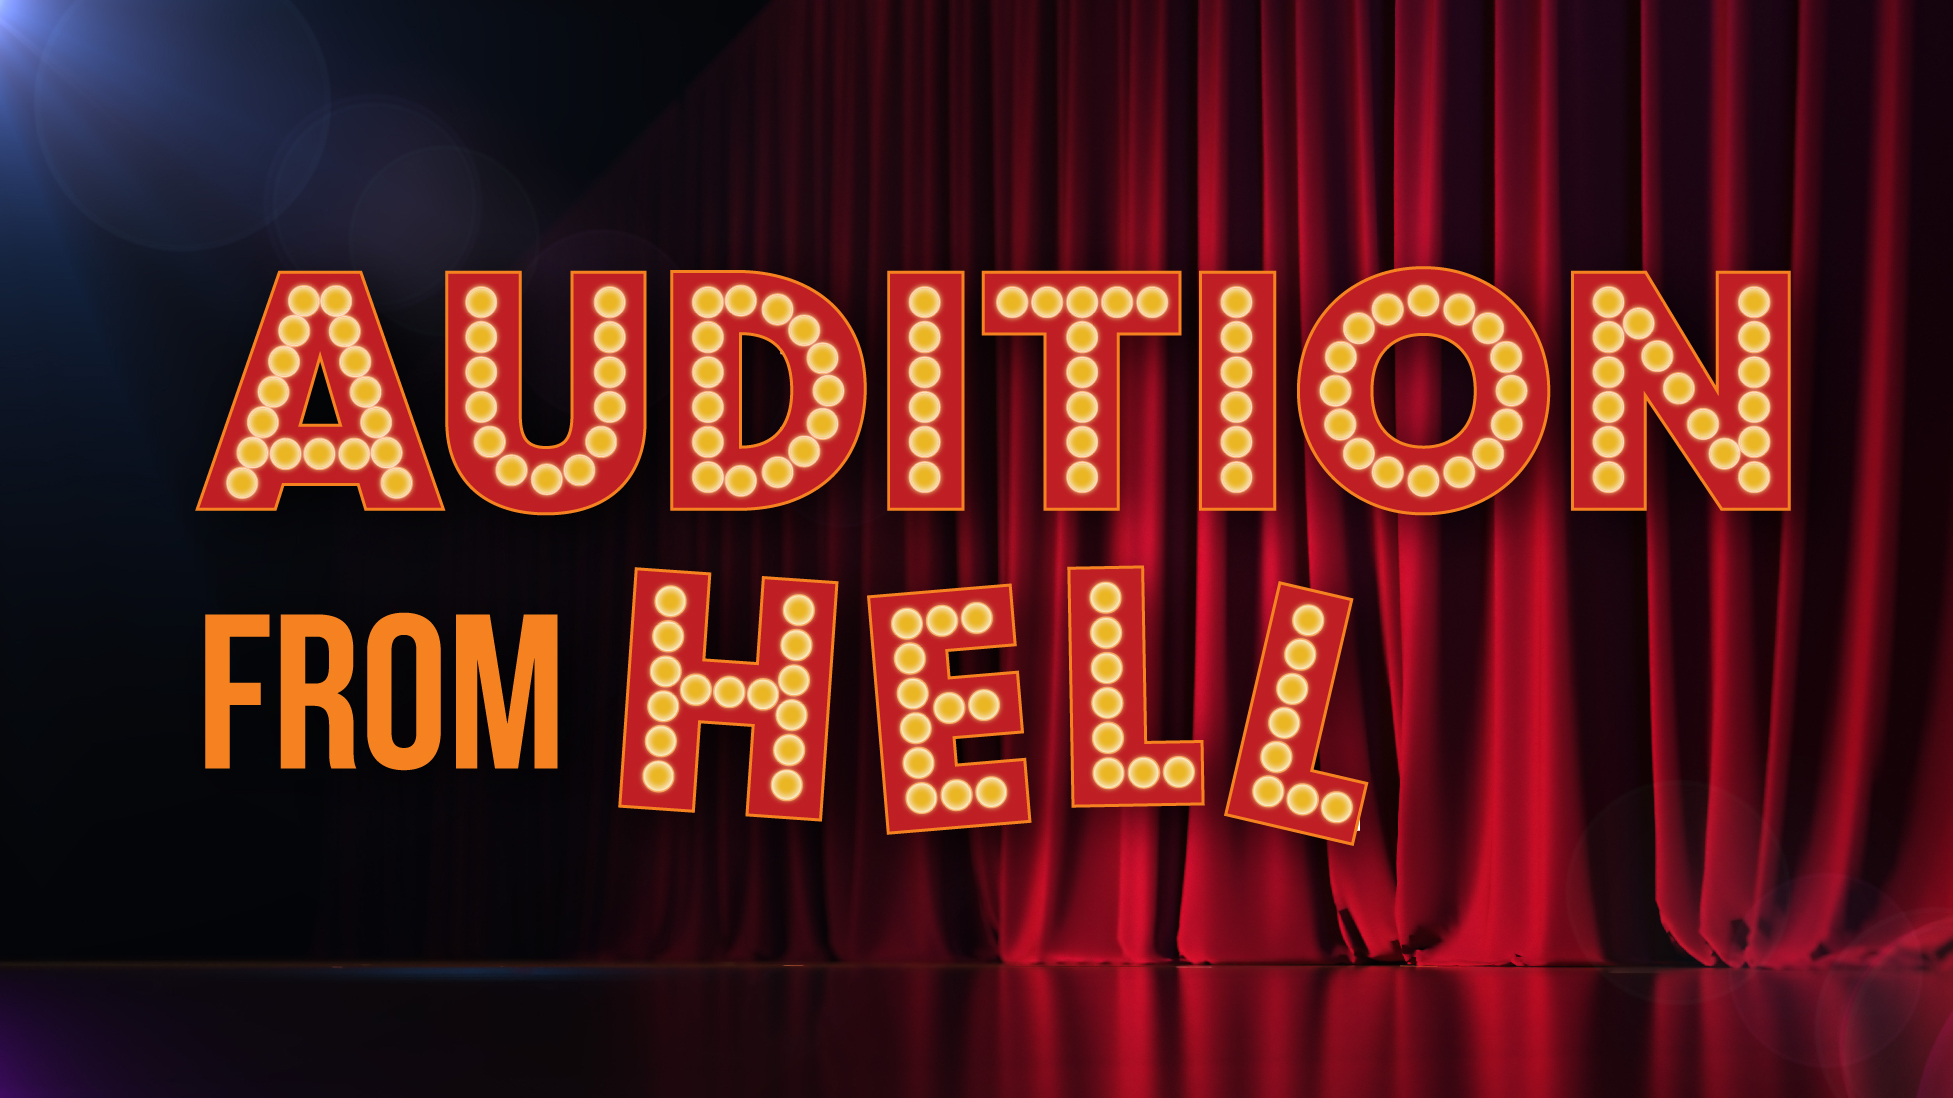 Audition From Hell show logo featuring a background of a large red stage curtain with glowing marquee lettering.